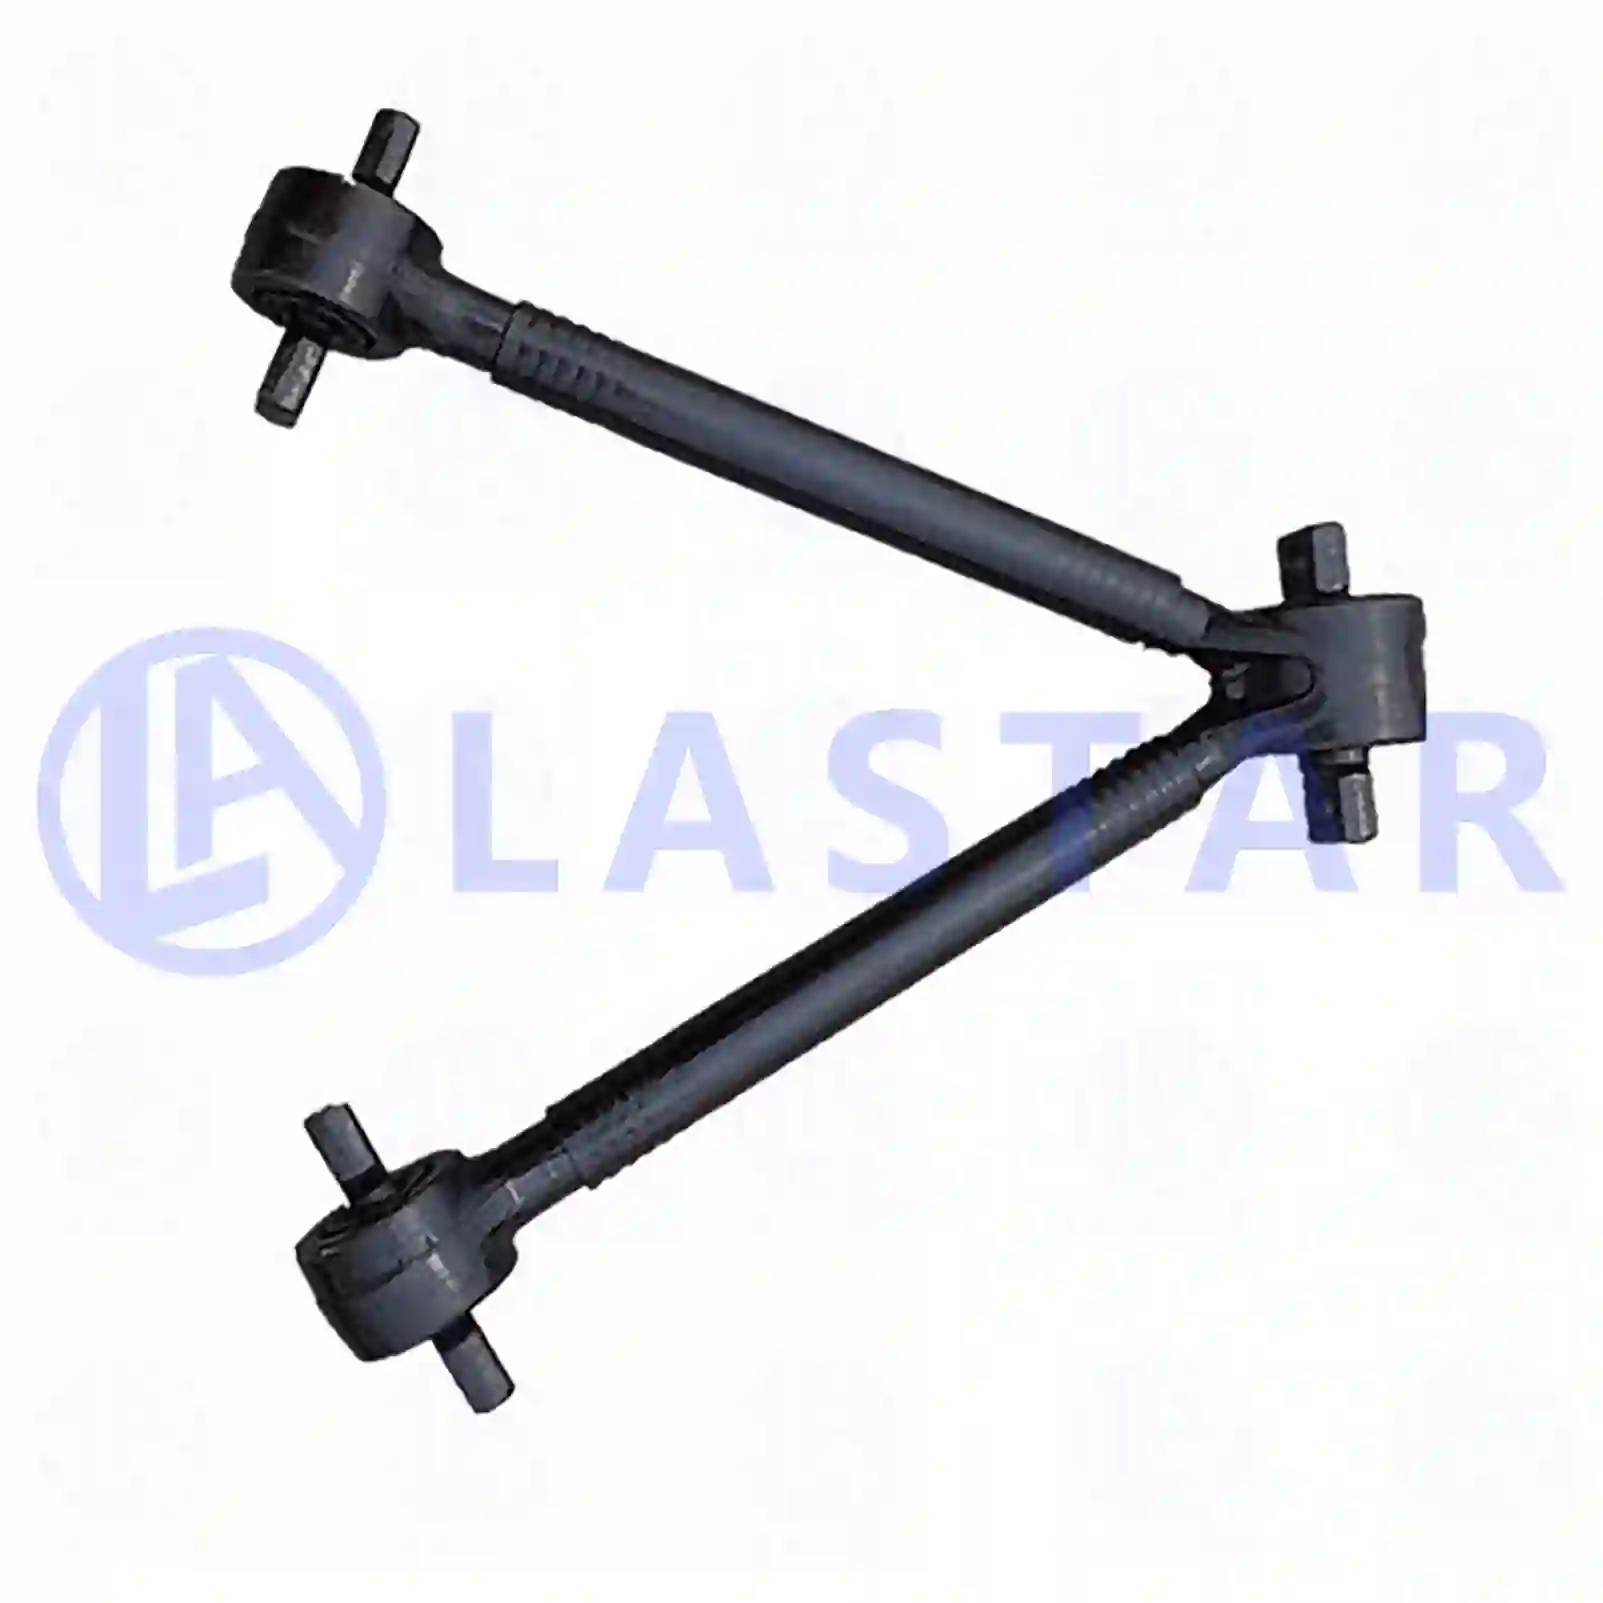 V-stay, 77727106, 41218620, 41218621, ||  77727106 Lastar Spare Part | Truck Spare Parts, Auotomotive Spare Parts V-stay, 77727106, 41218620, 41218621, ||  77727106 Lastar Spare Part | Truck Spare Parts, Auotomotive Spare Parts